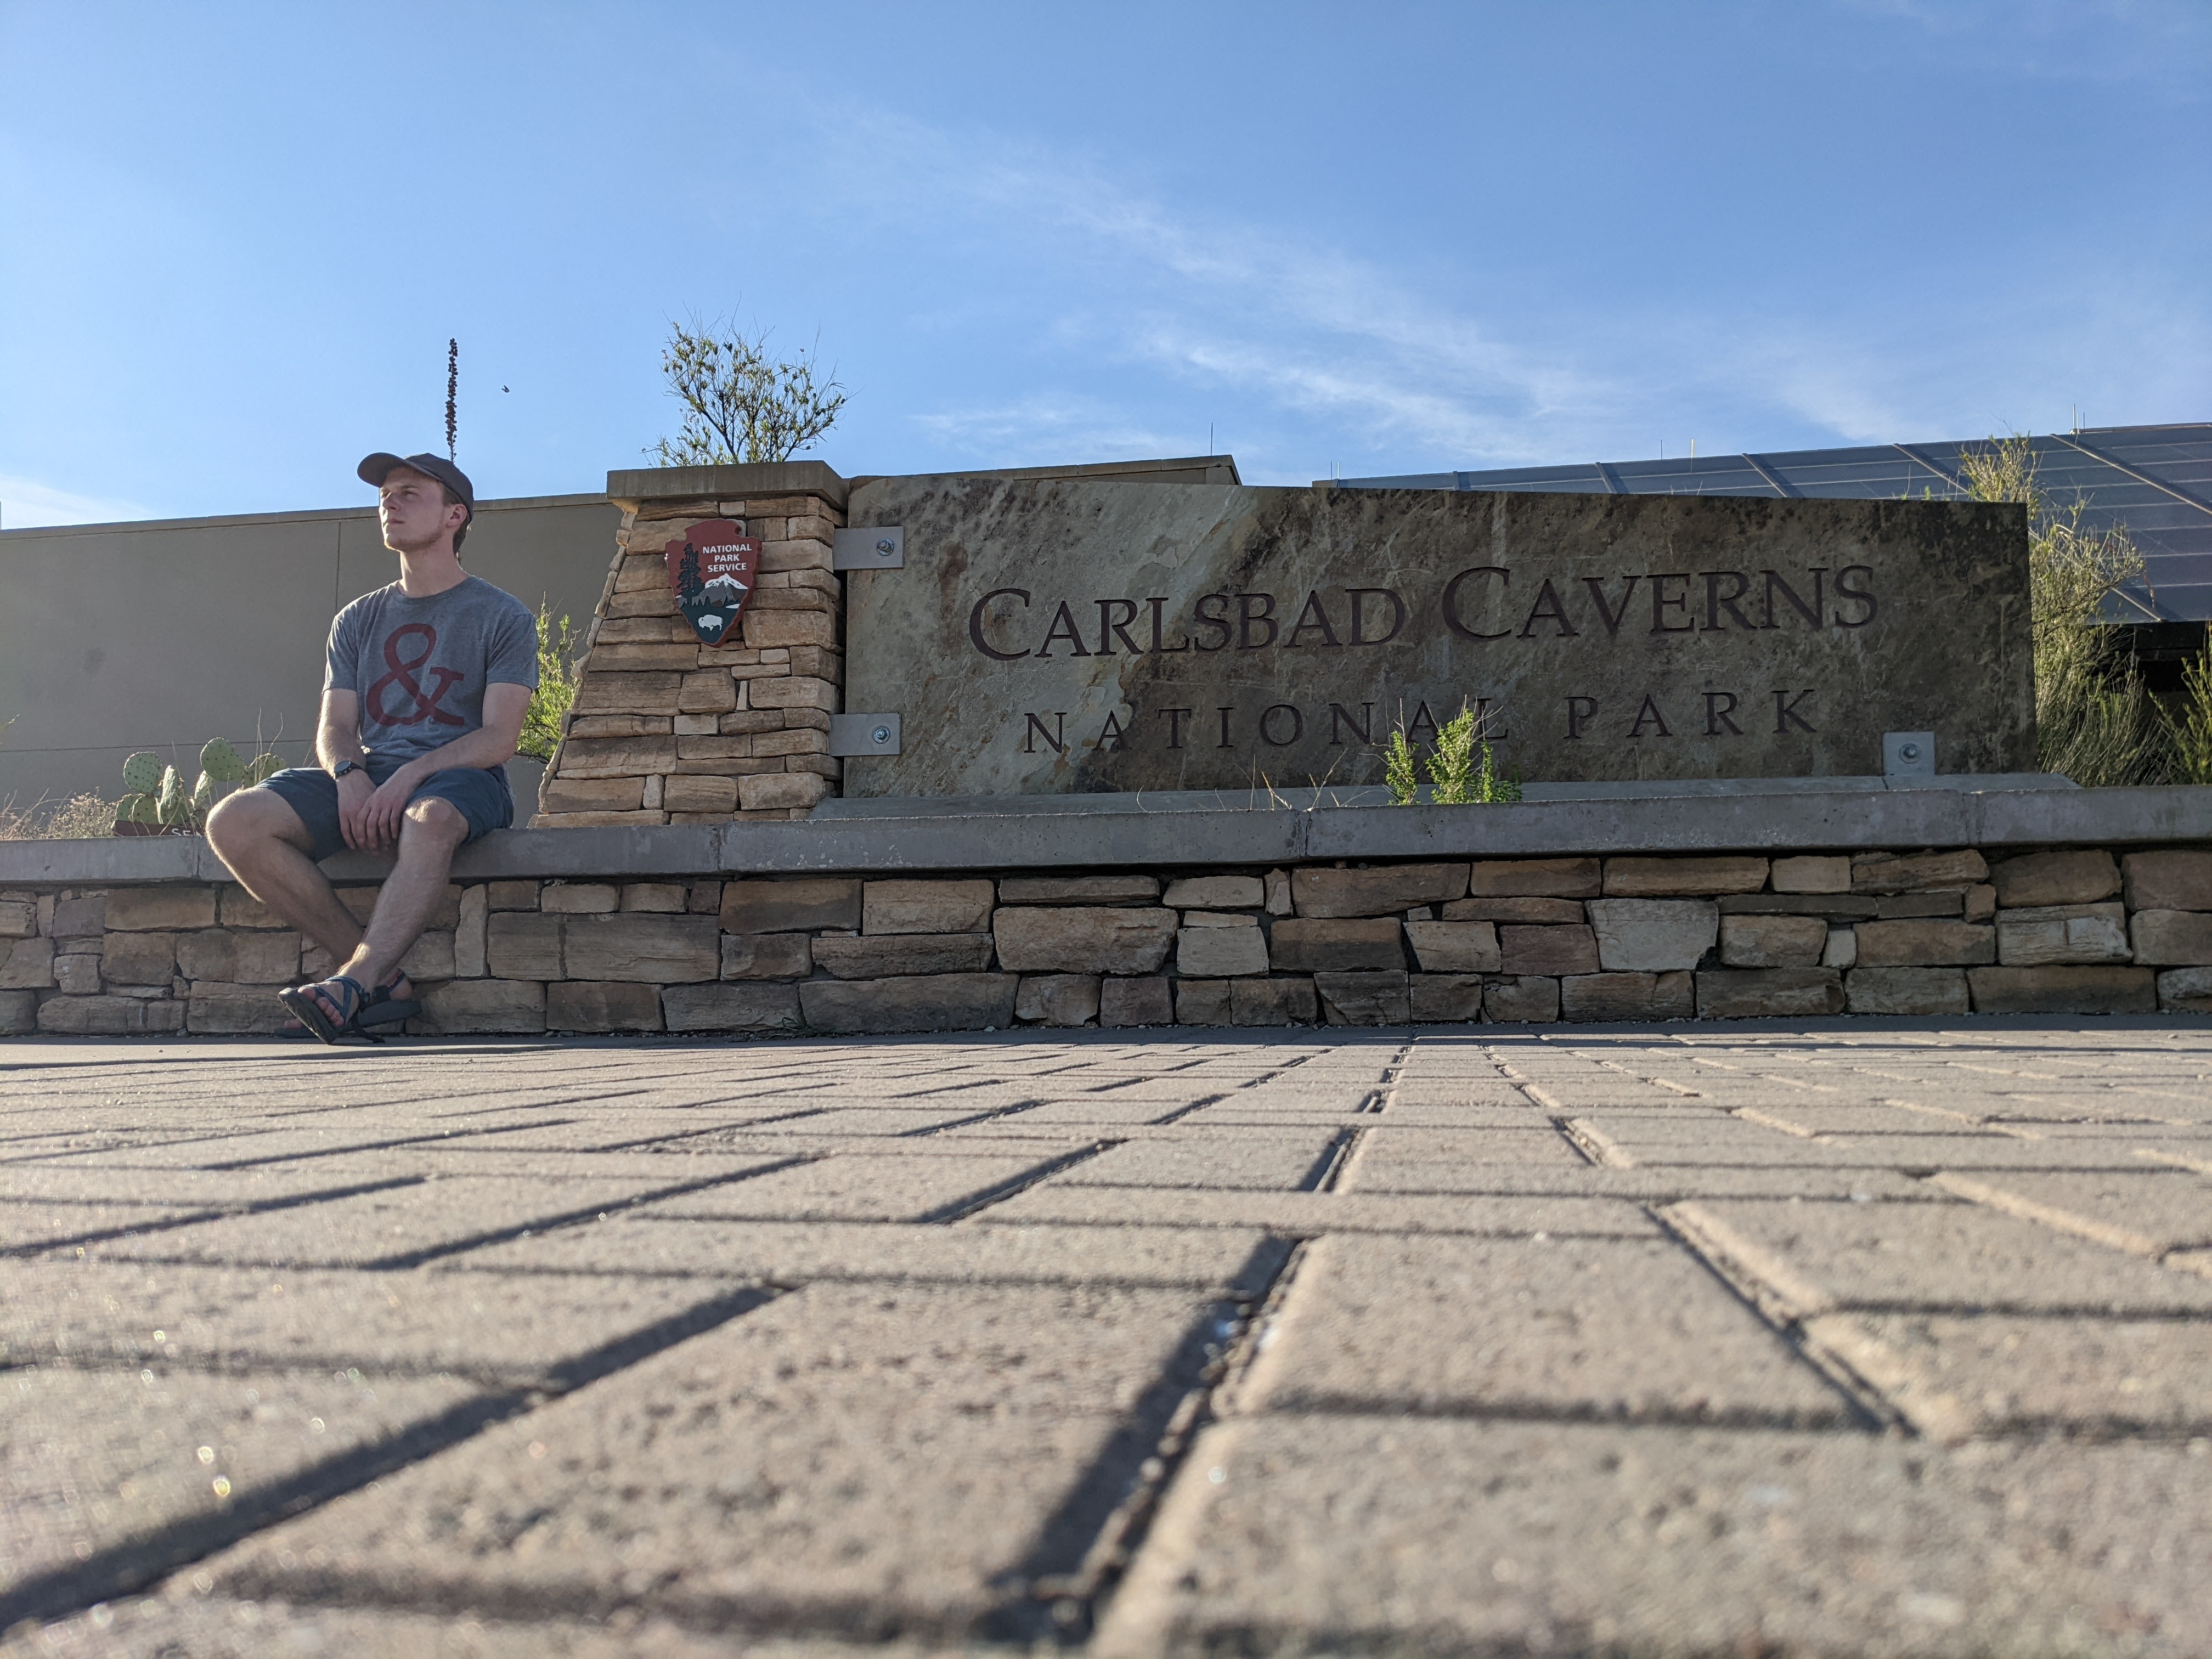 Kyle looking into distance next to Carlsbad Caverns National Park sign